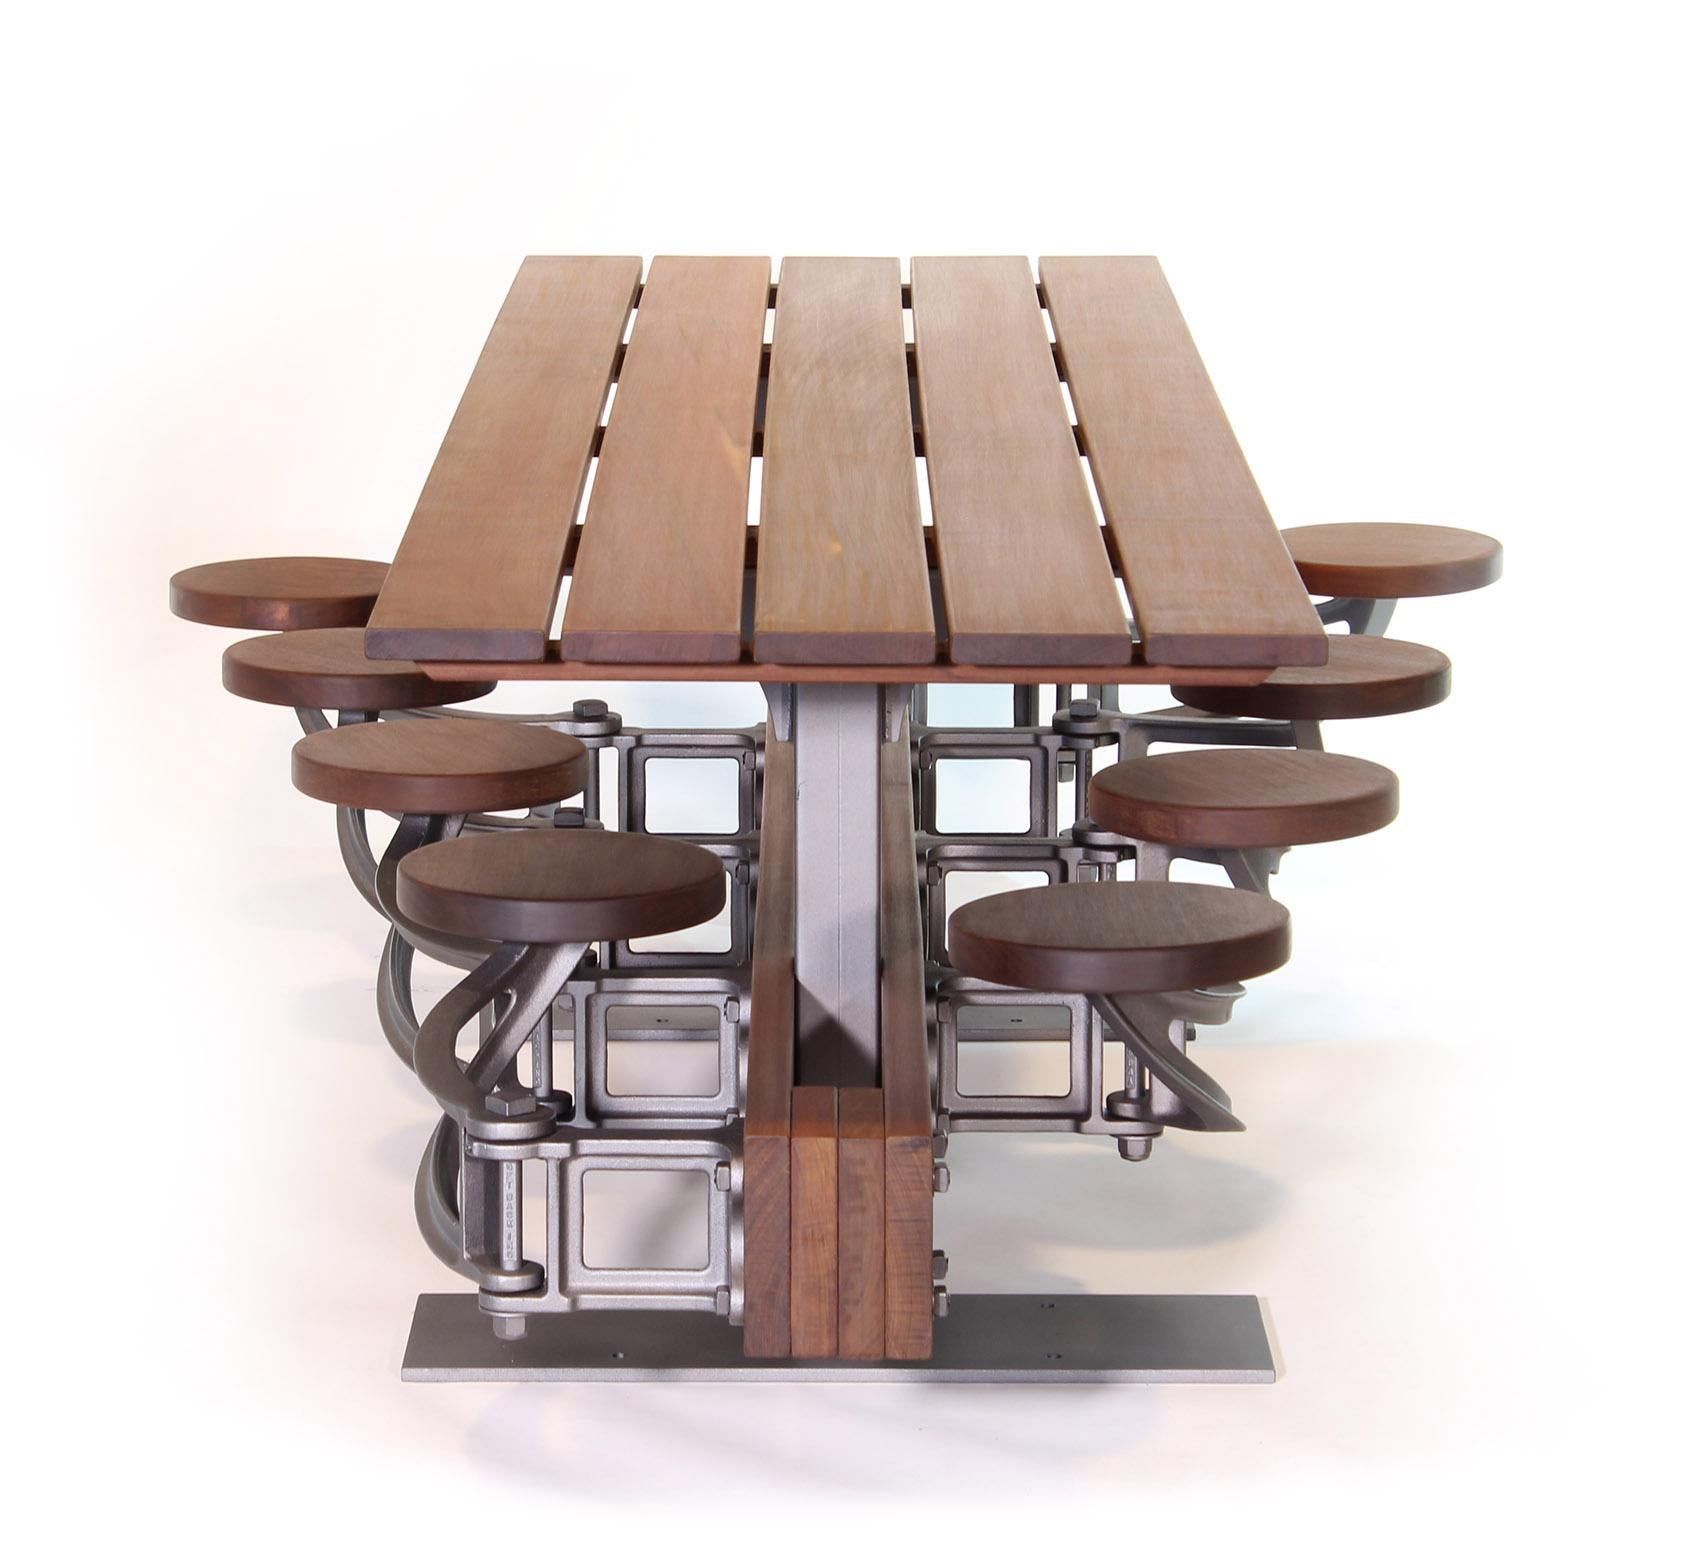 Swing-Out-Seat Outdoor Dining Table Set - 6 Seater and 4 Seater in Pub Height 9